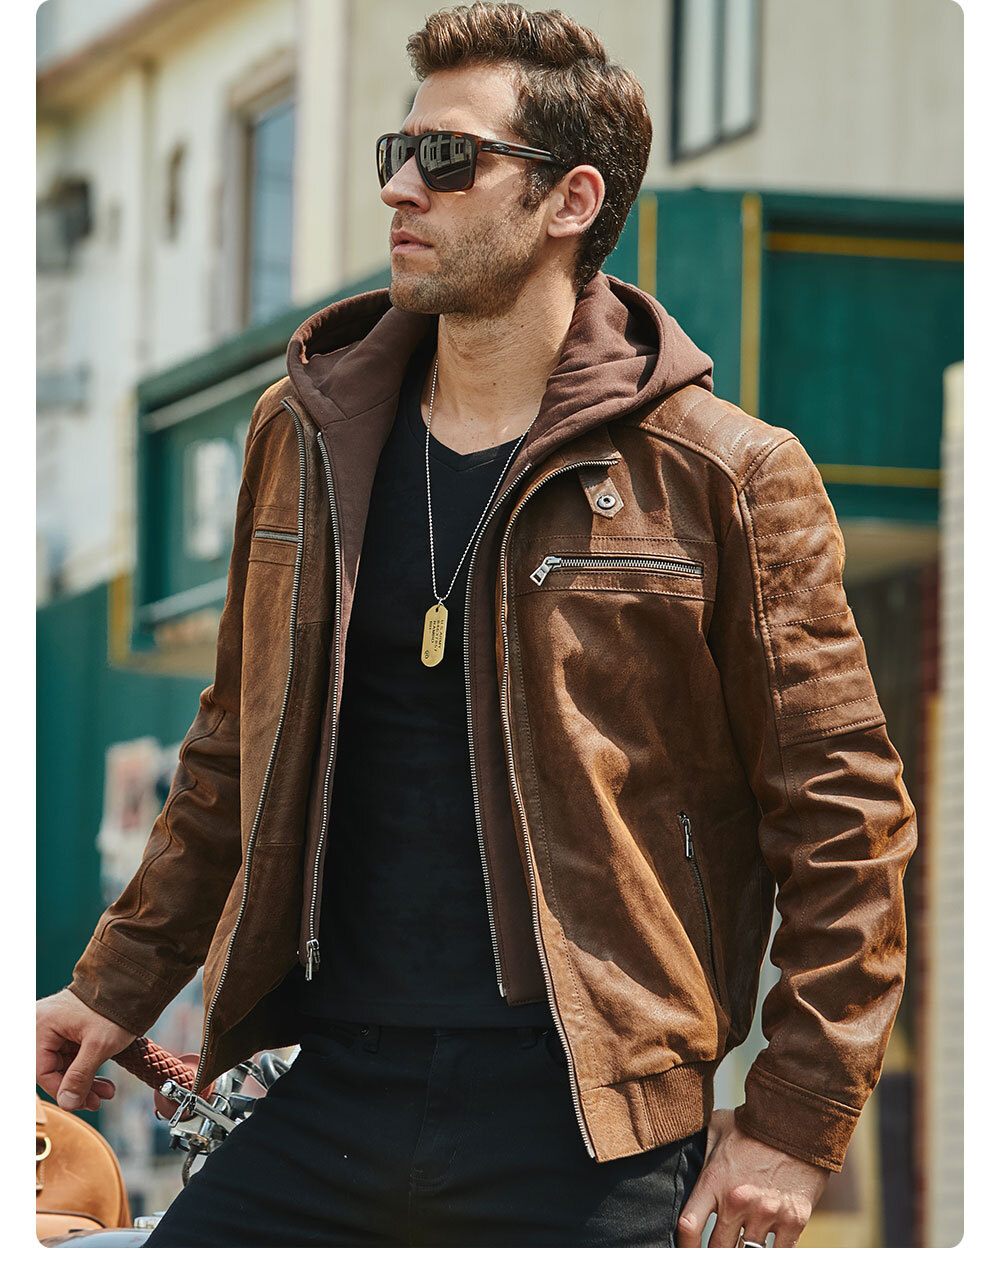 Men's Brown Motorcycle Leather Jacket with Detachable Hood  M2015-73B 100% polyester detachable hood motorcycle leather jacket| detachable hood motorcycle flavor leather jacket